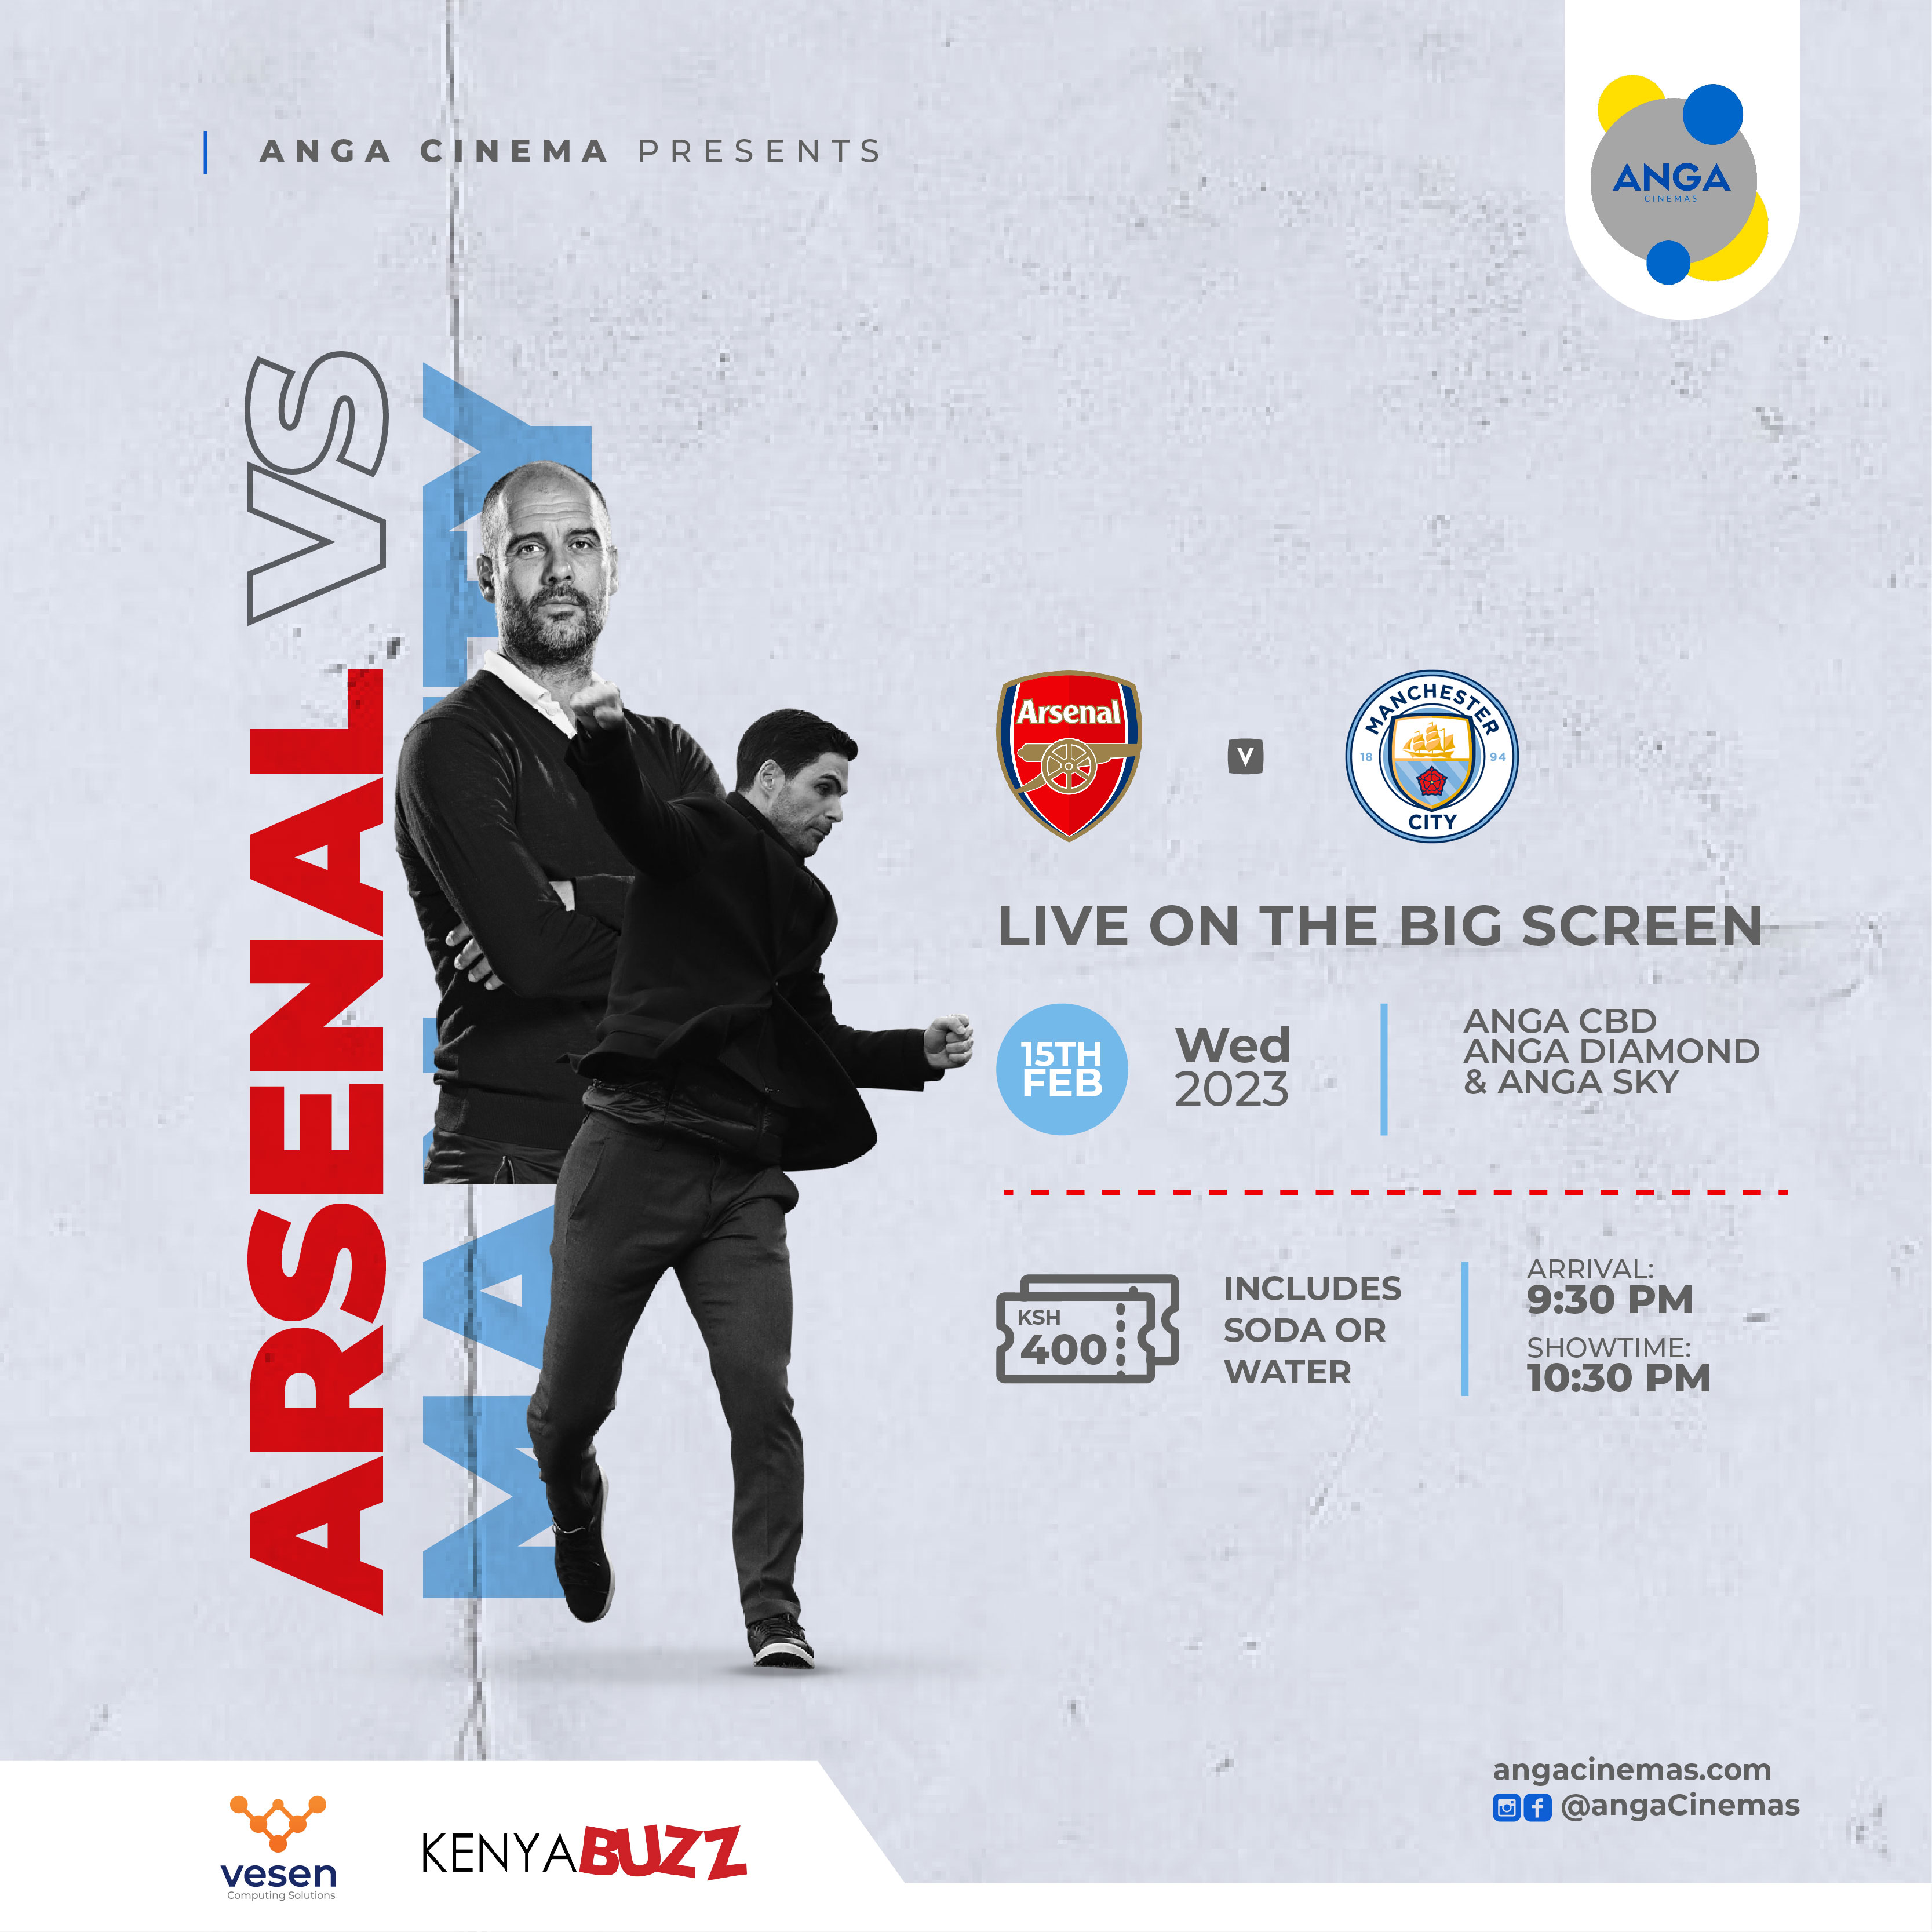 Arsenal Vs Manchester City - Live On The Big Screen